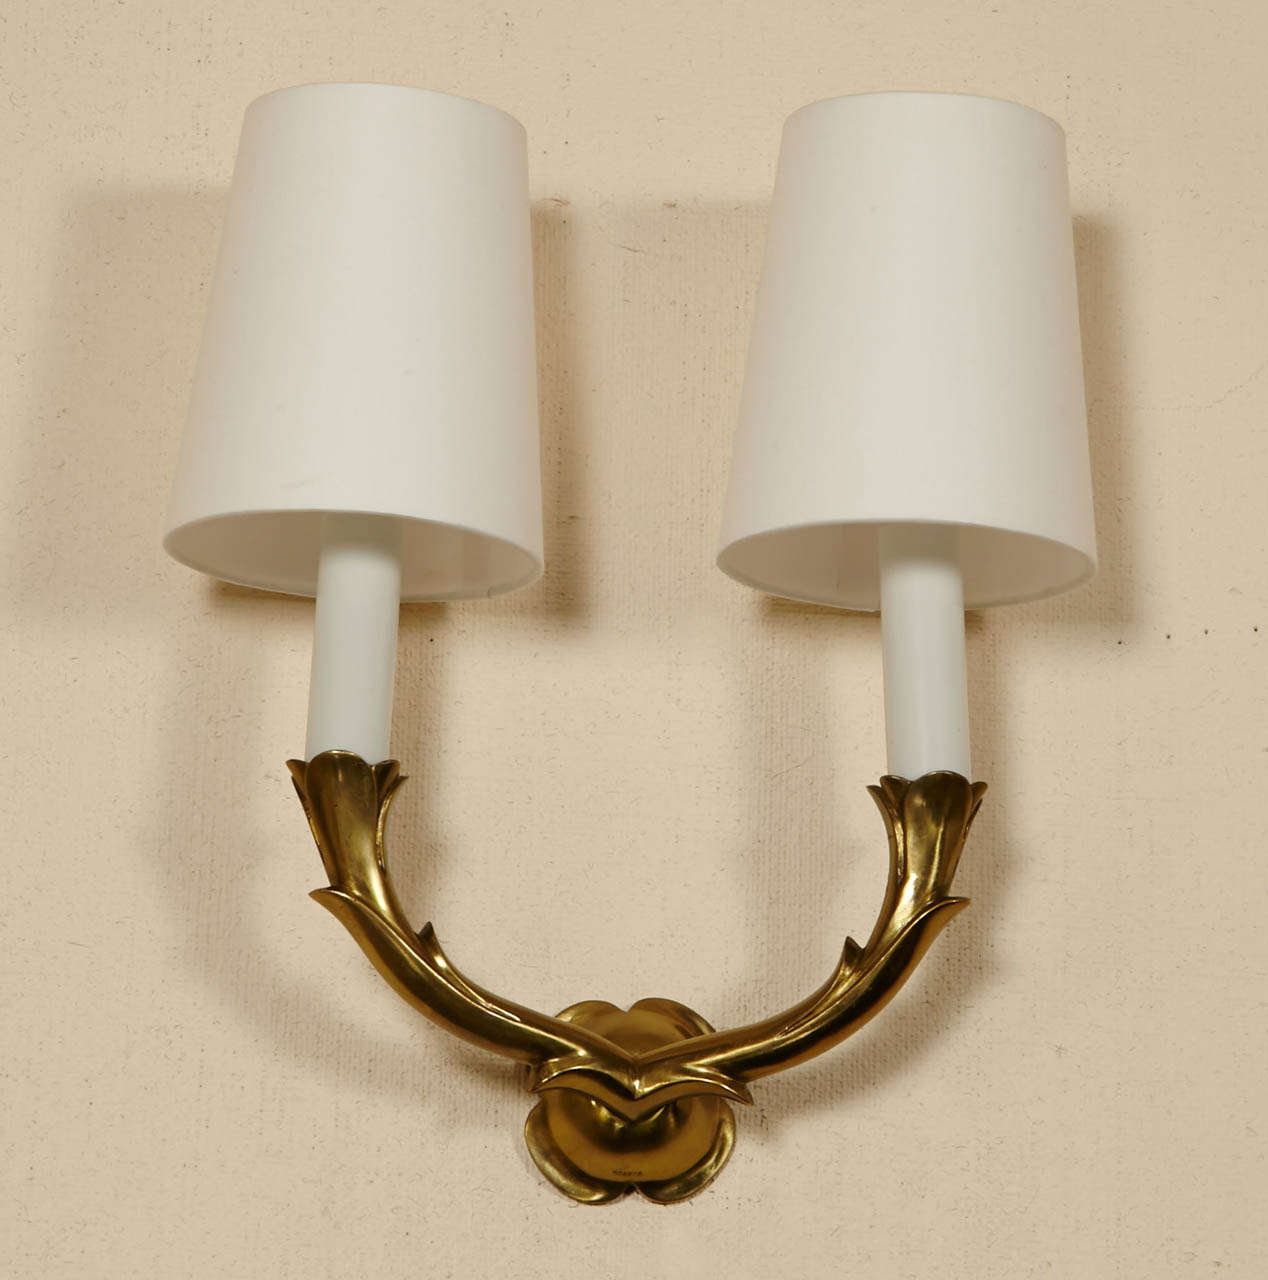 Pair of gilt polished bronze wall sconces, by Riccardo  SCARPA, Italie, 1950’s.
With two arms and flower base. White opaline shafts and fabric shades.
Signed on base. 
Bronze height 13 x width 22 x depth 8 cm (5 x 8.7 x 3.2 inches).

Our